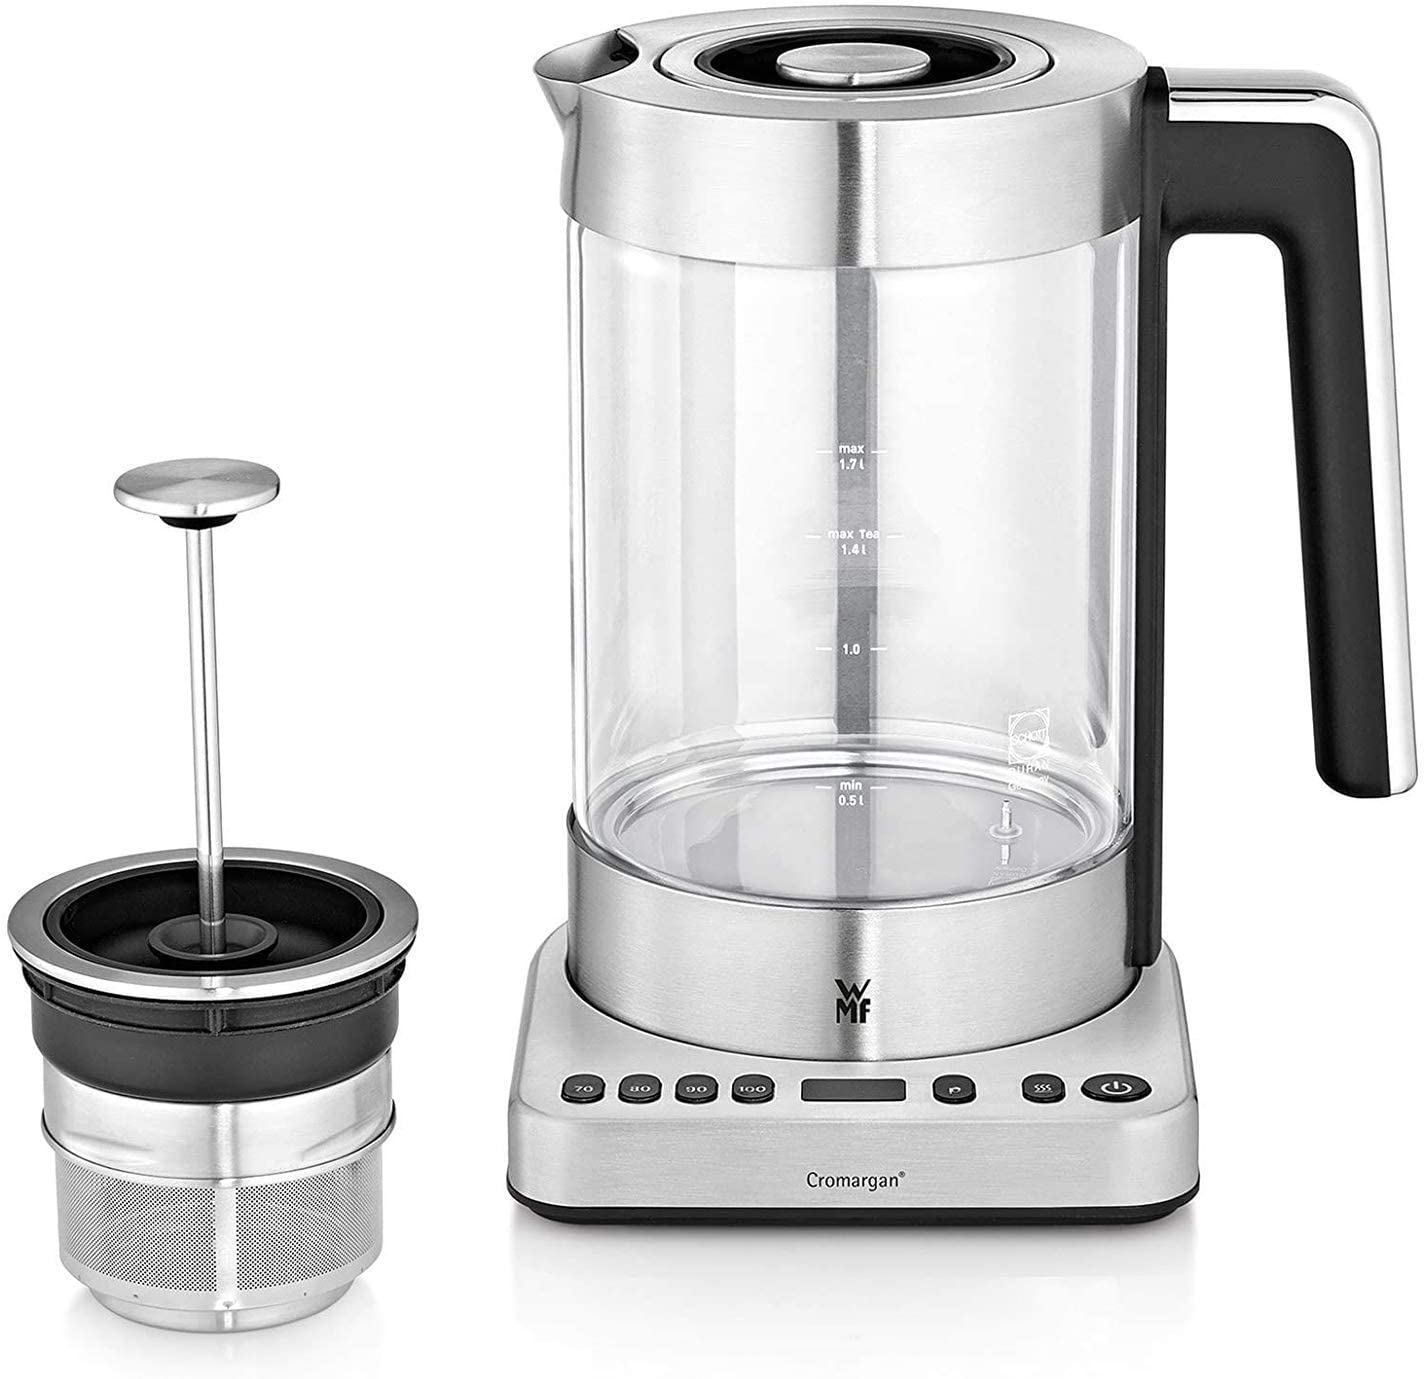 WMF Lono 2 in 1 Vario kettle, with temperature setting, 1.4 - 1.7 l, 3000 W, glass tea maker with tea strainer, keep warm function